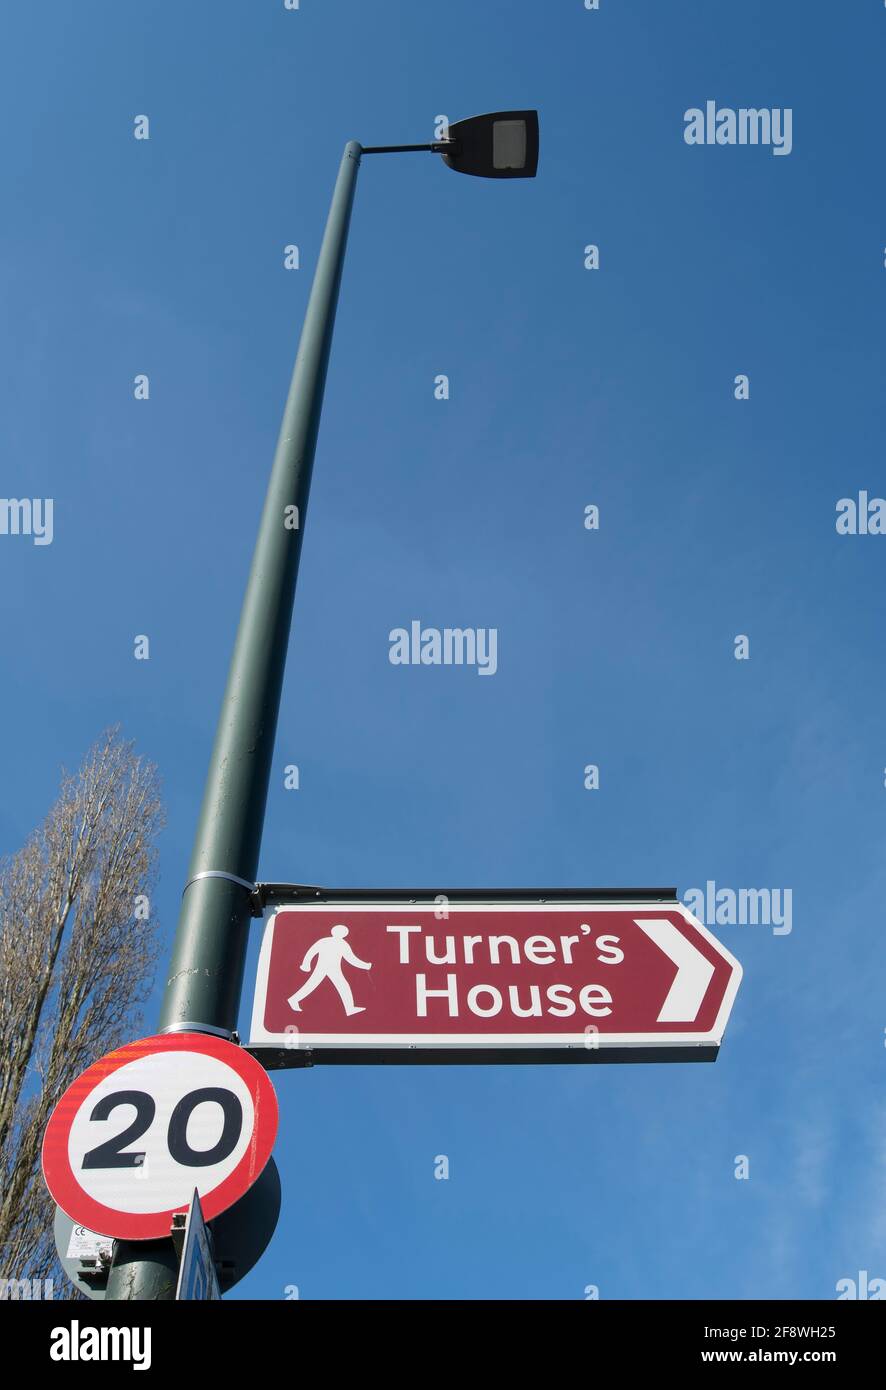 right pointing sign for sandycombe lodge, twickenham, middlesex, england, former home of artist jmw turner Stock Photo